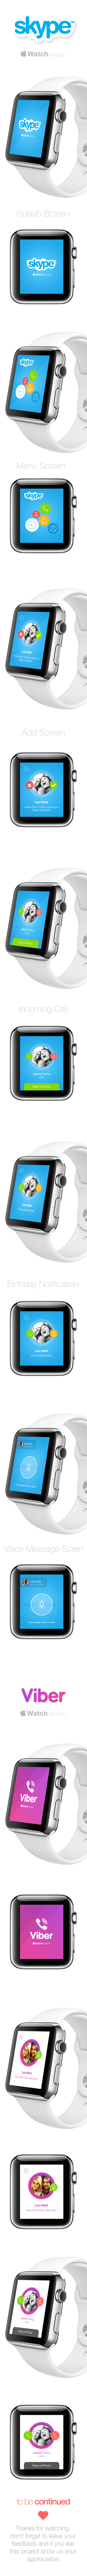 05-apple-watch-app-ui-ux-user-experience-interfface-design.png